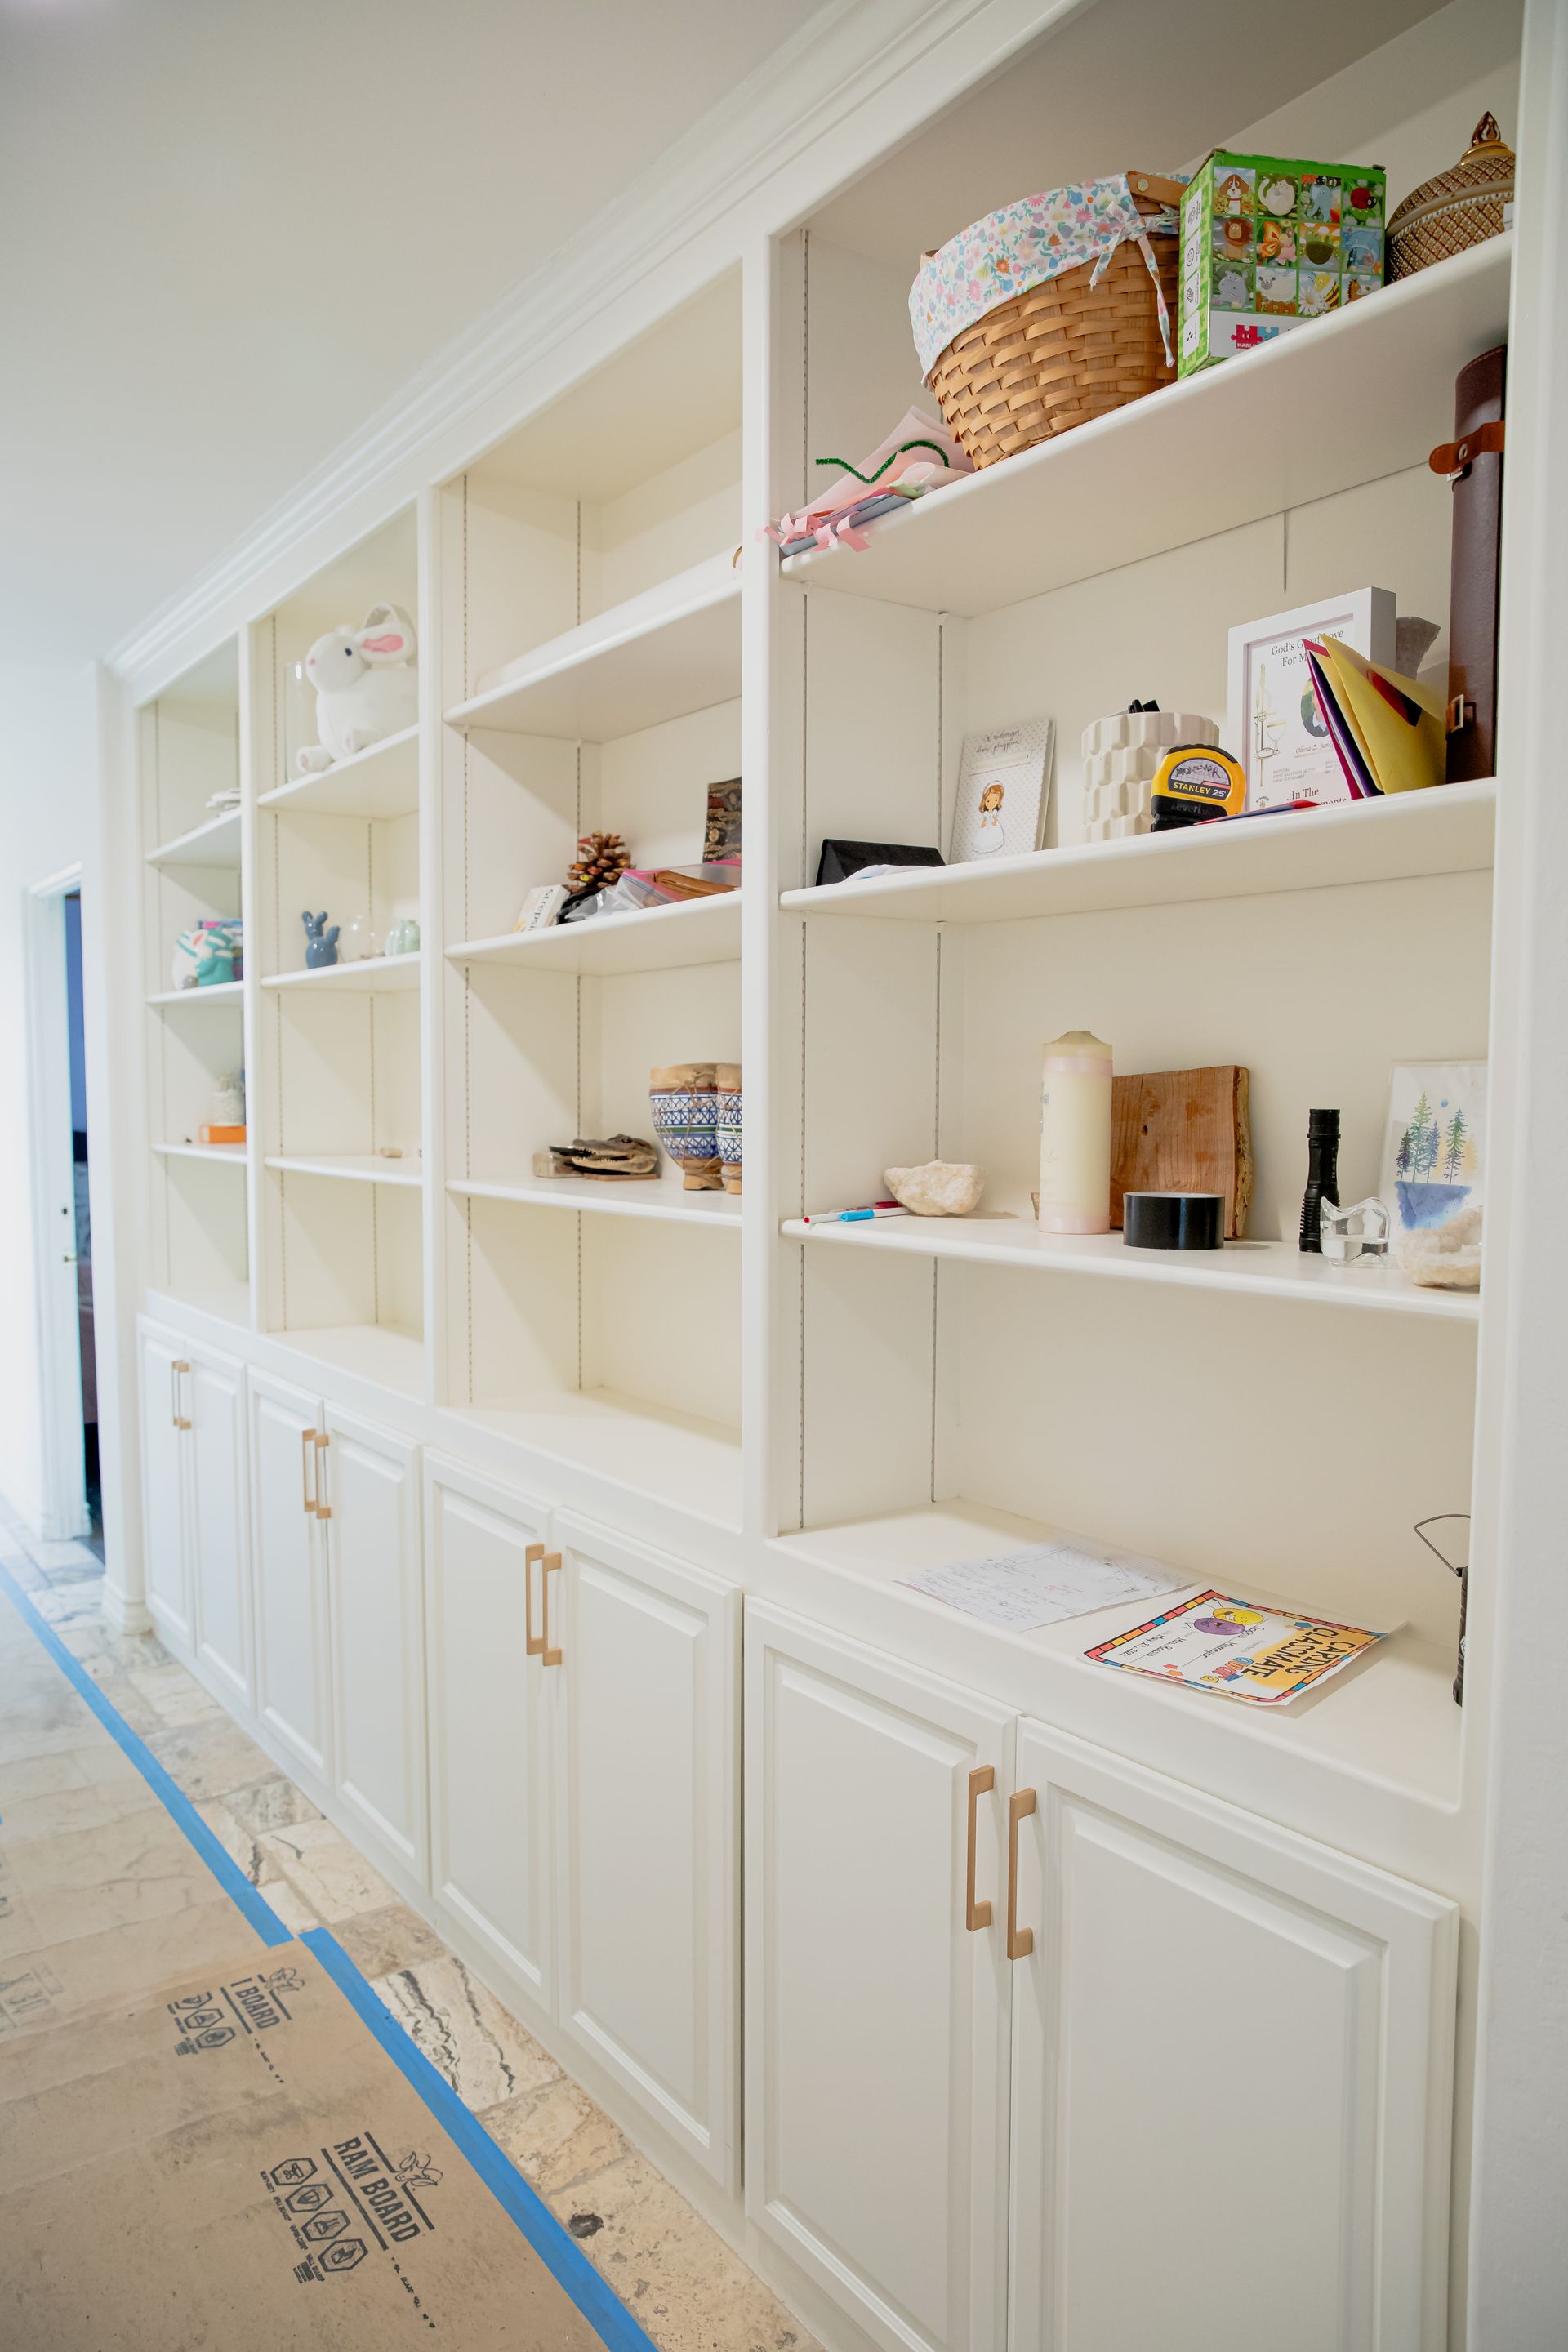 A row of white shelves filled with lots of items in a room.